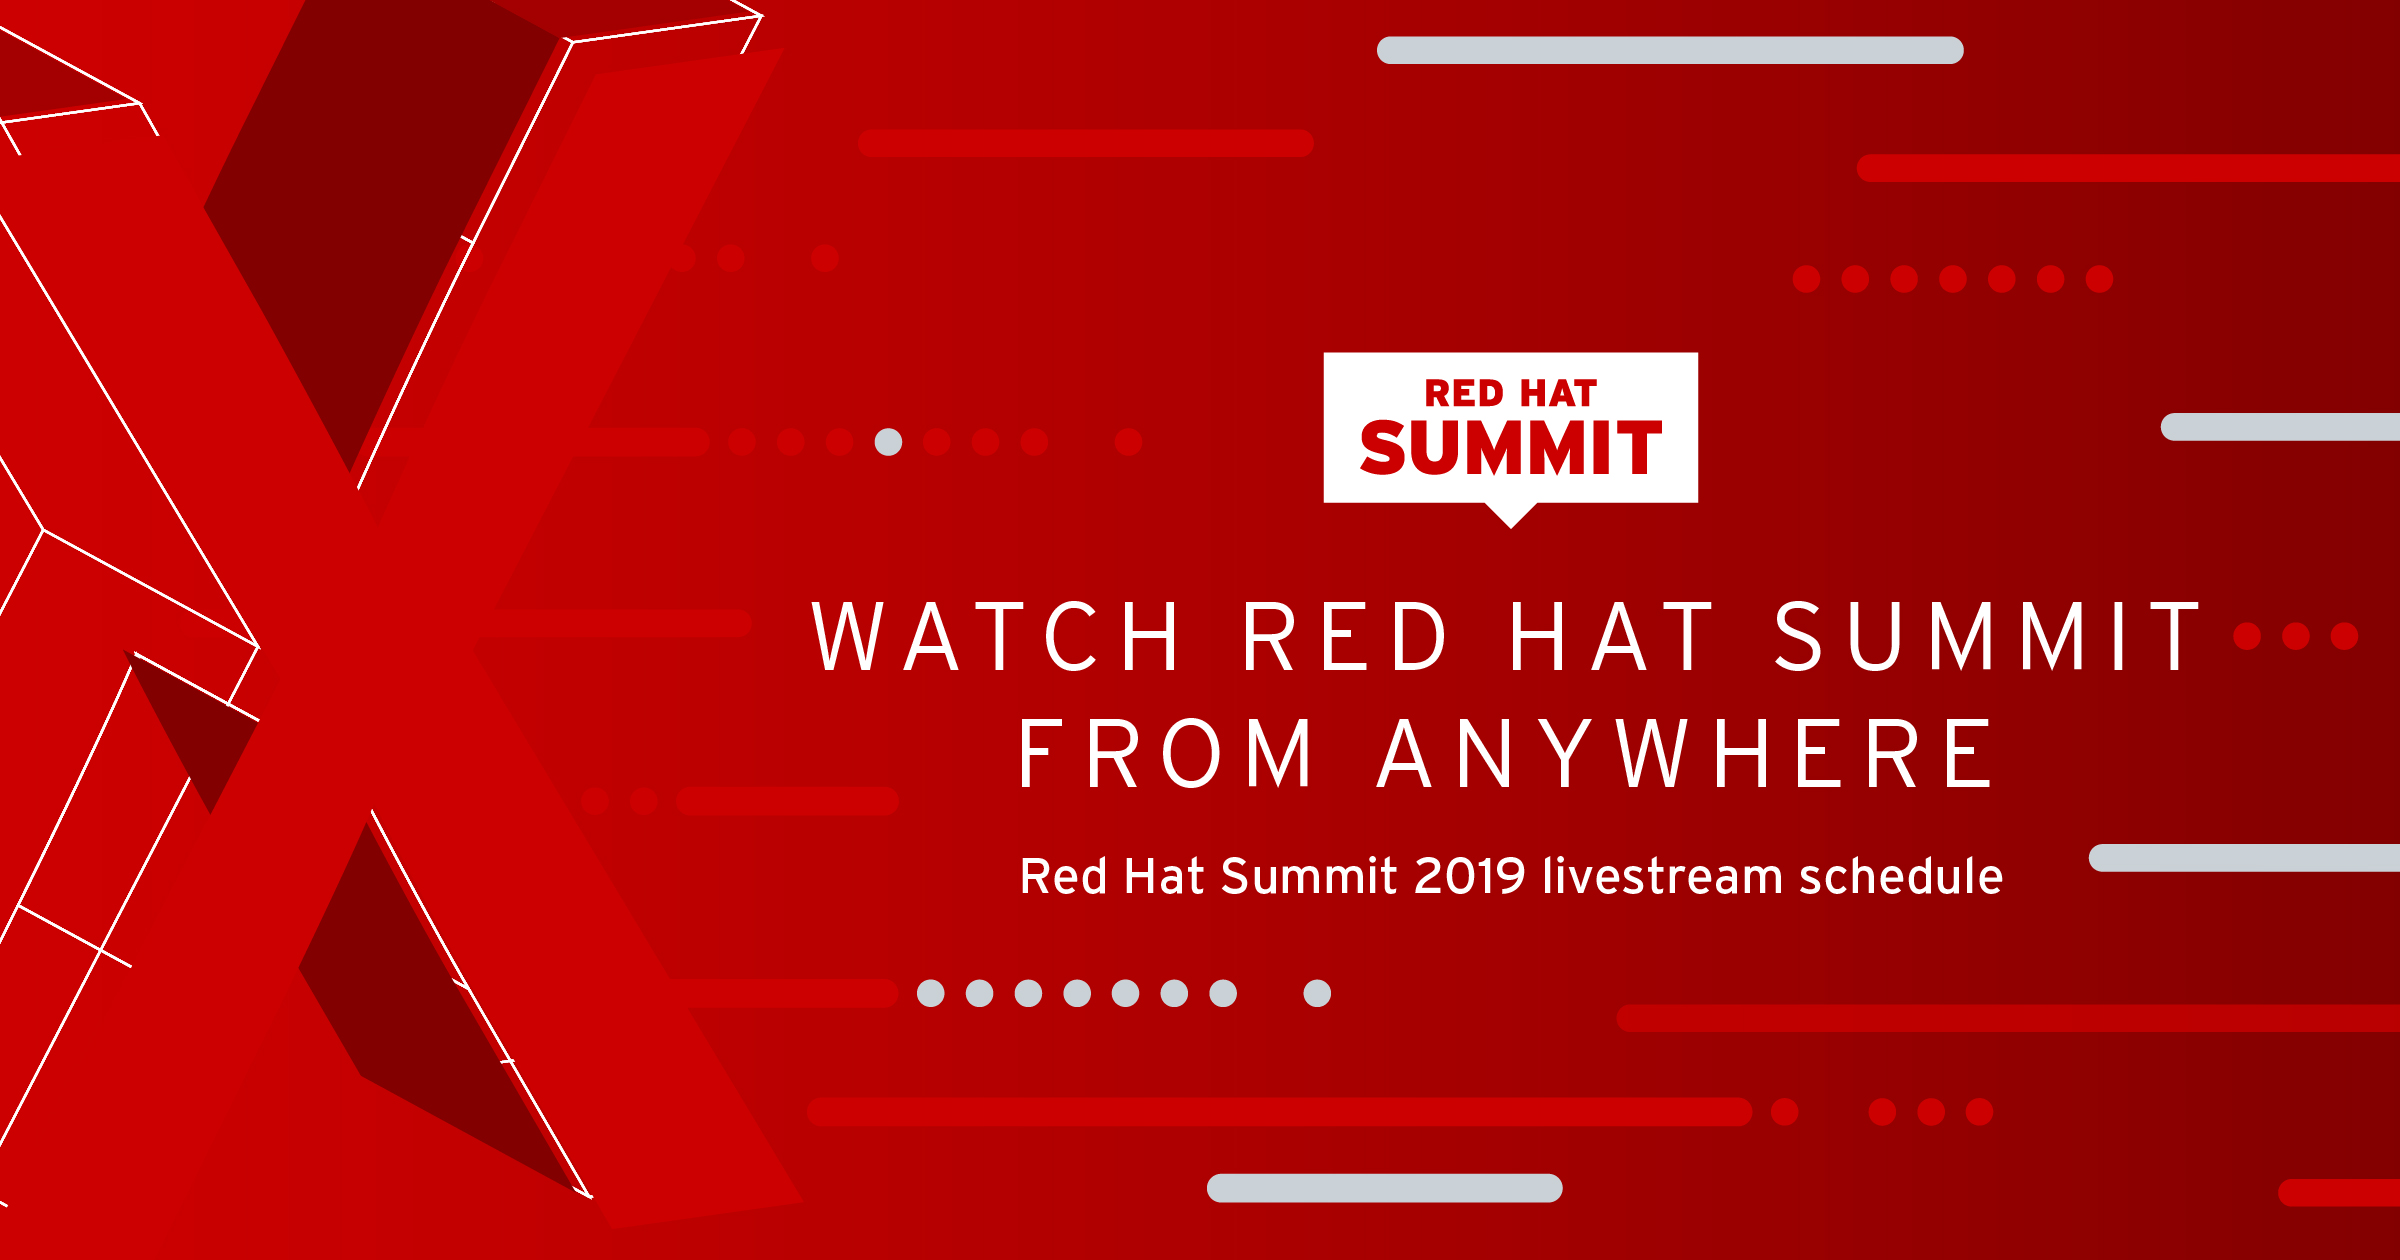 Watch Red Hat Summit from anywhere Red Hat to livestream press